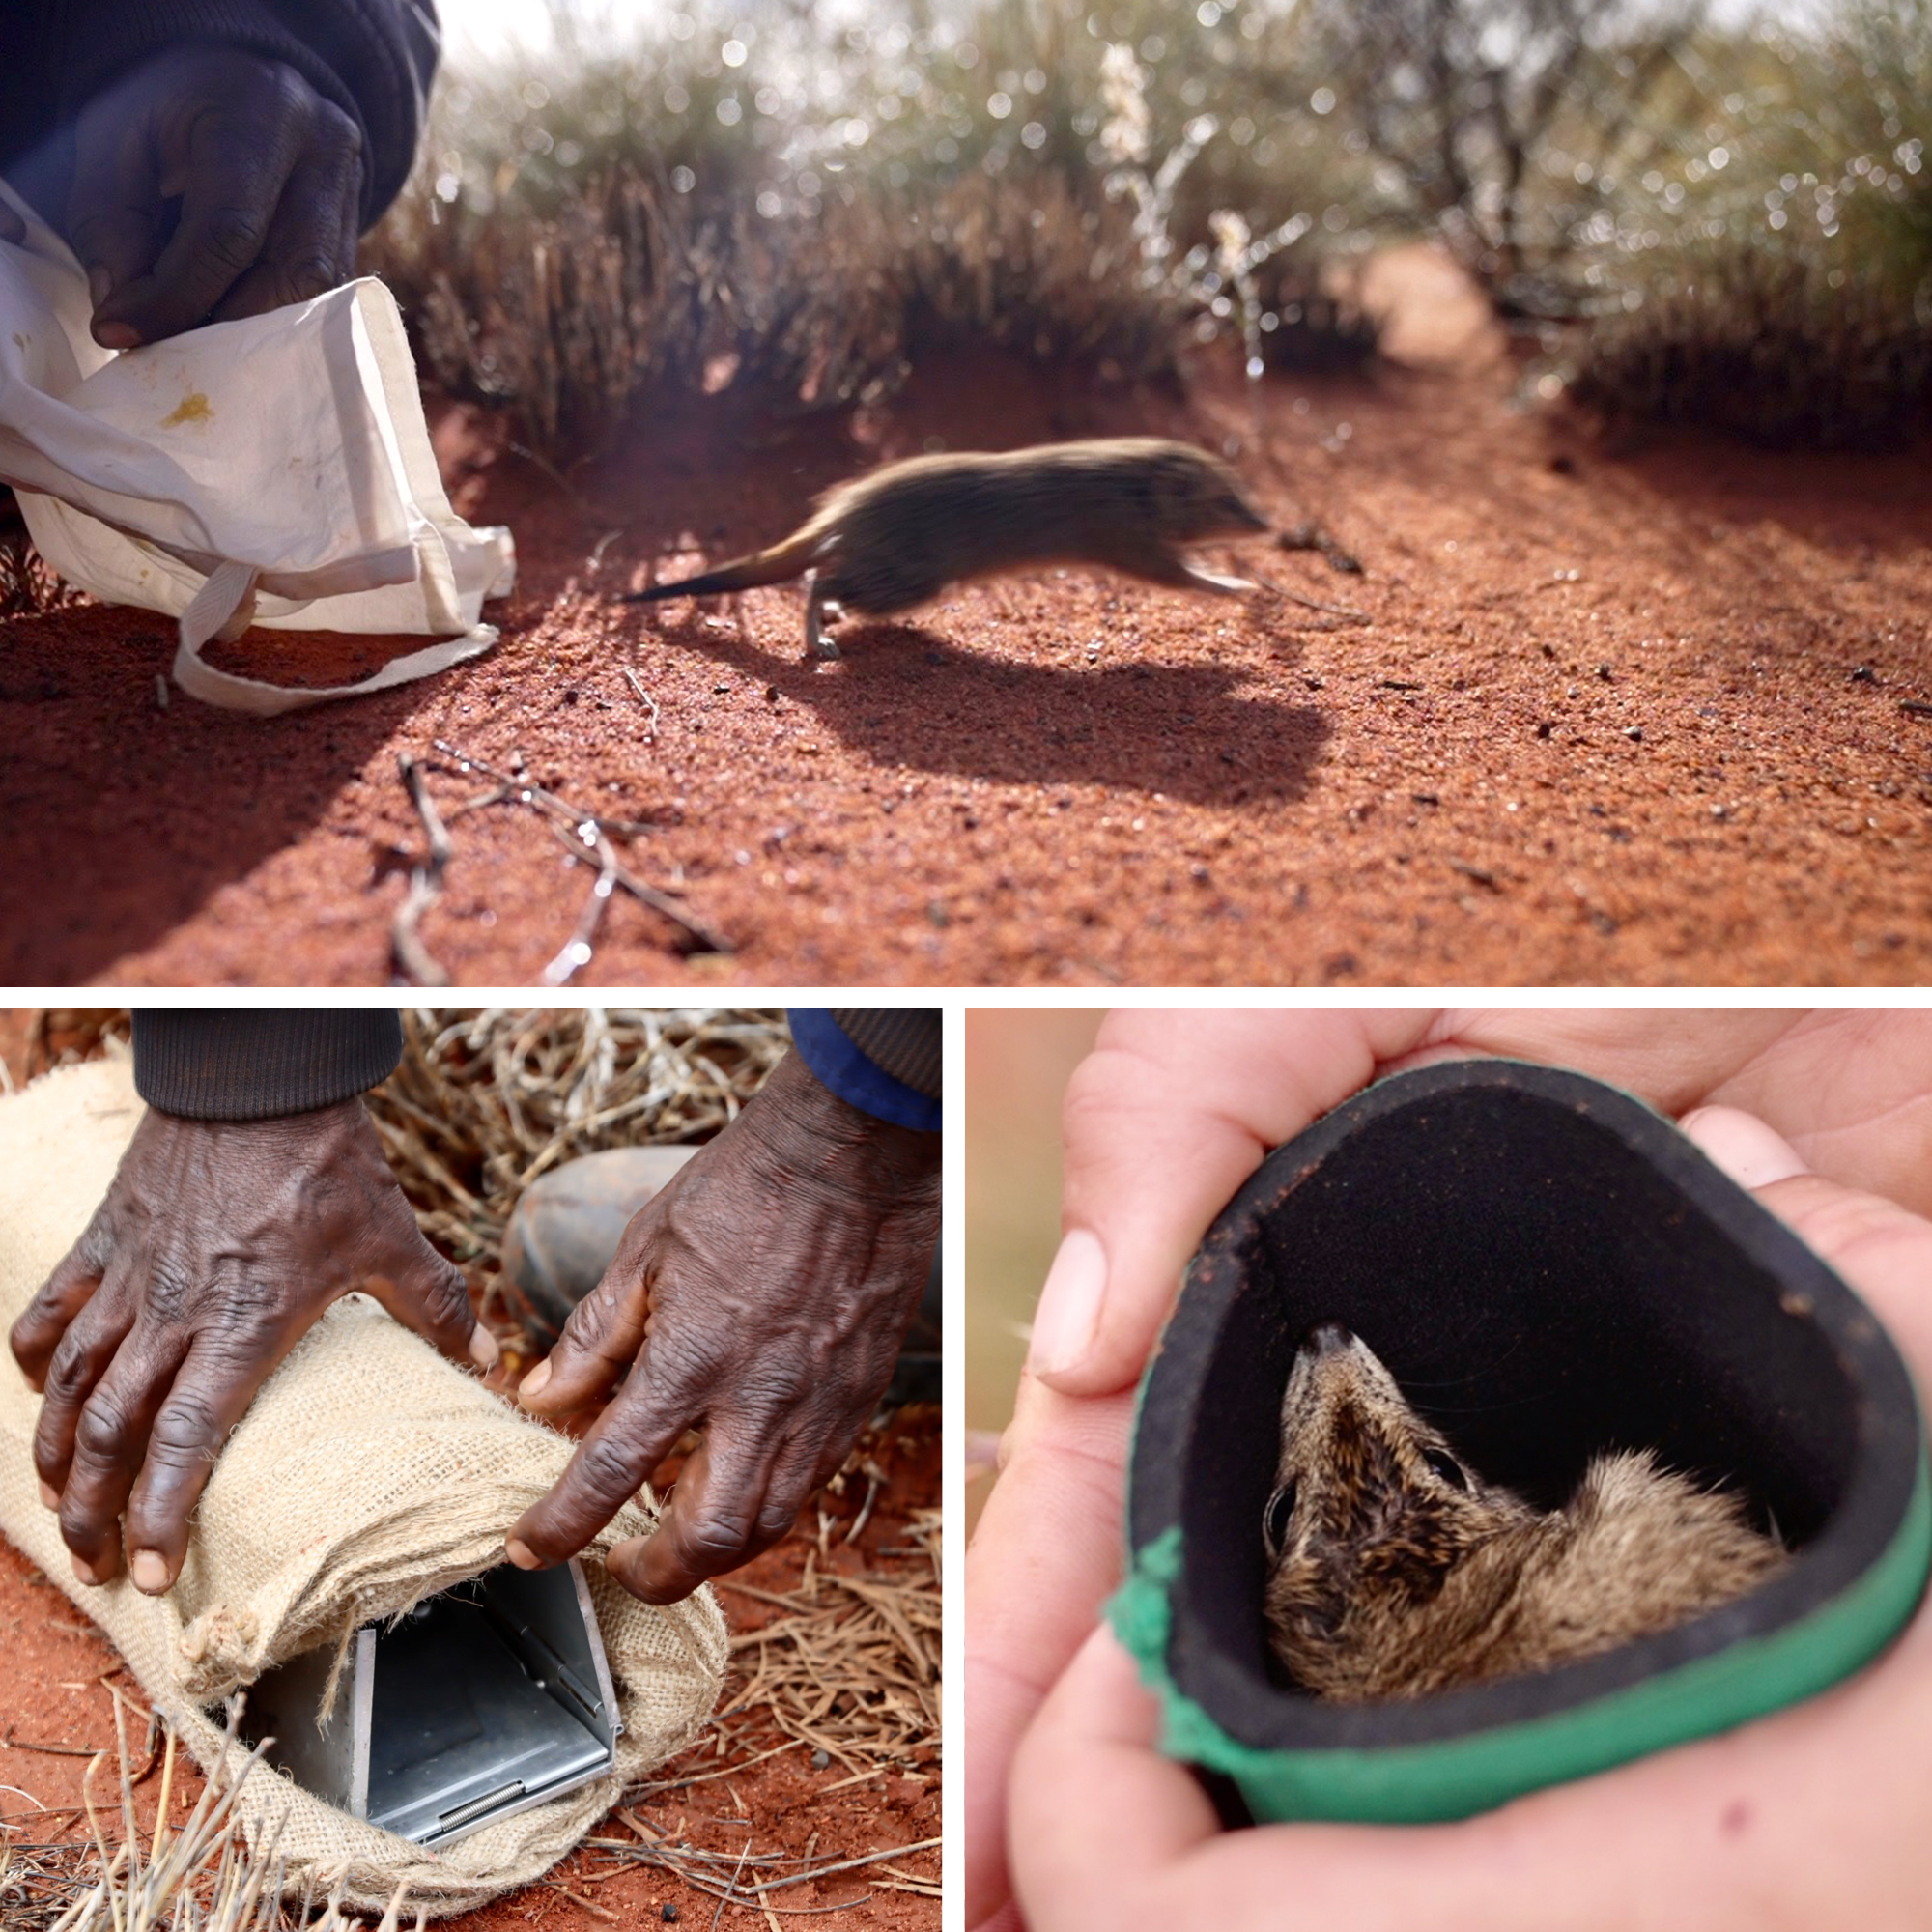 Three-panel composite shot of a tiny Mulgara, a pair of hands and another creature being carefully held.